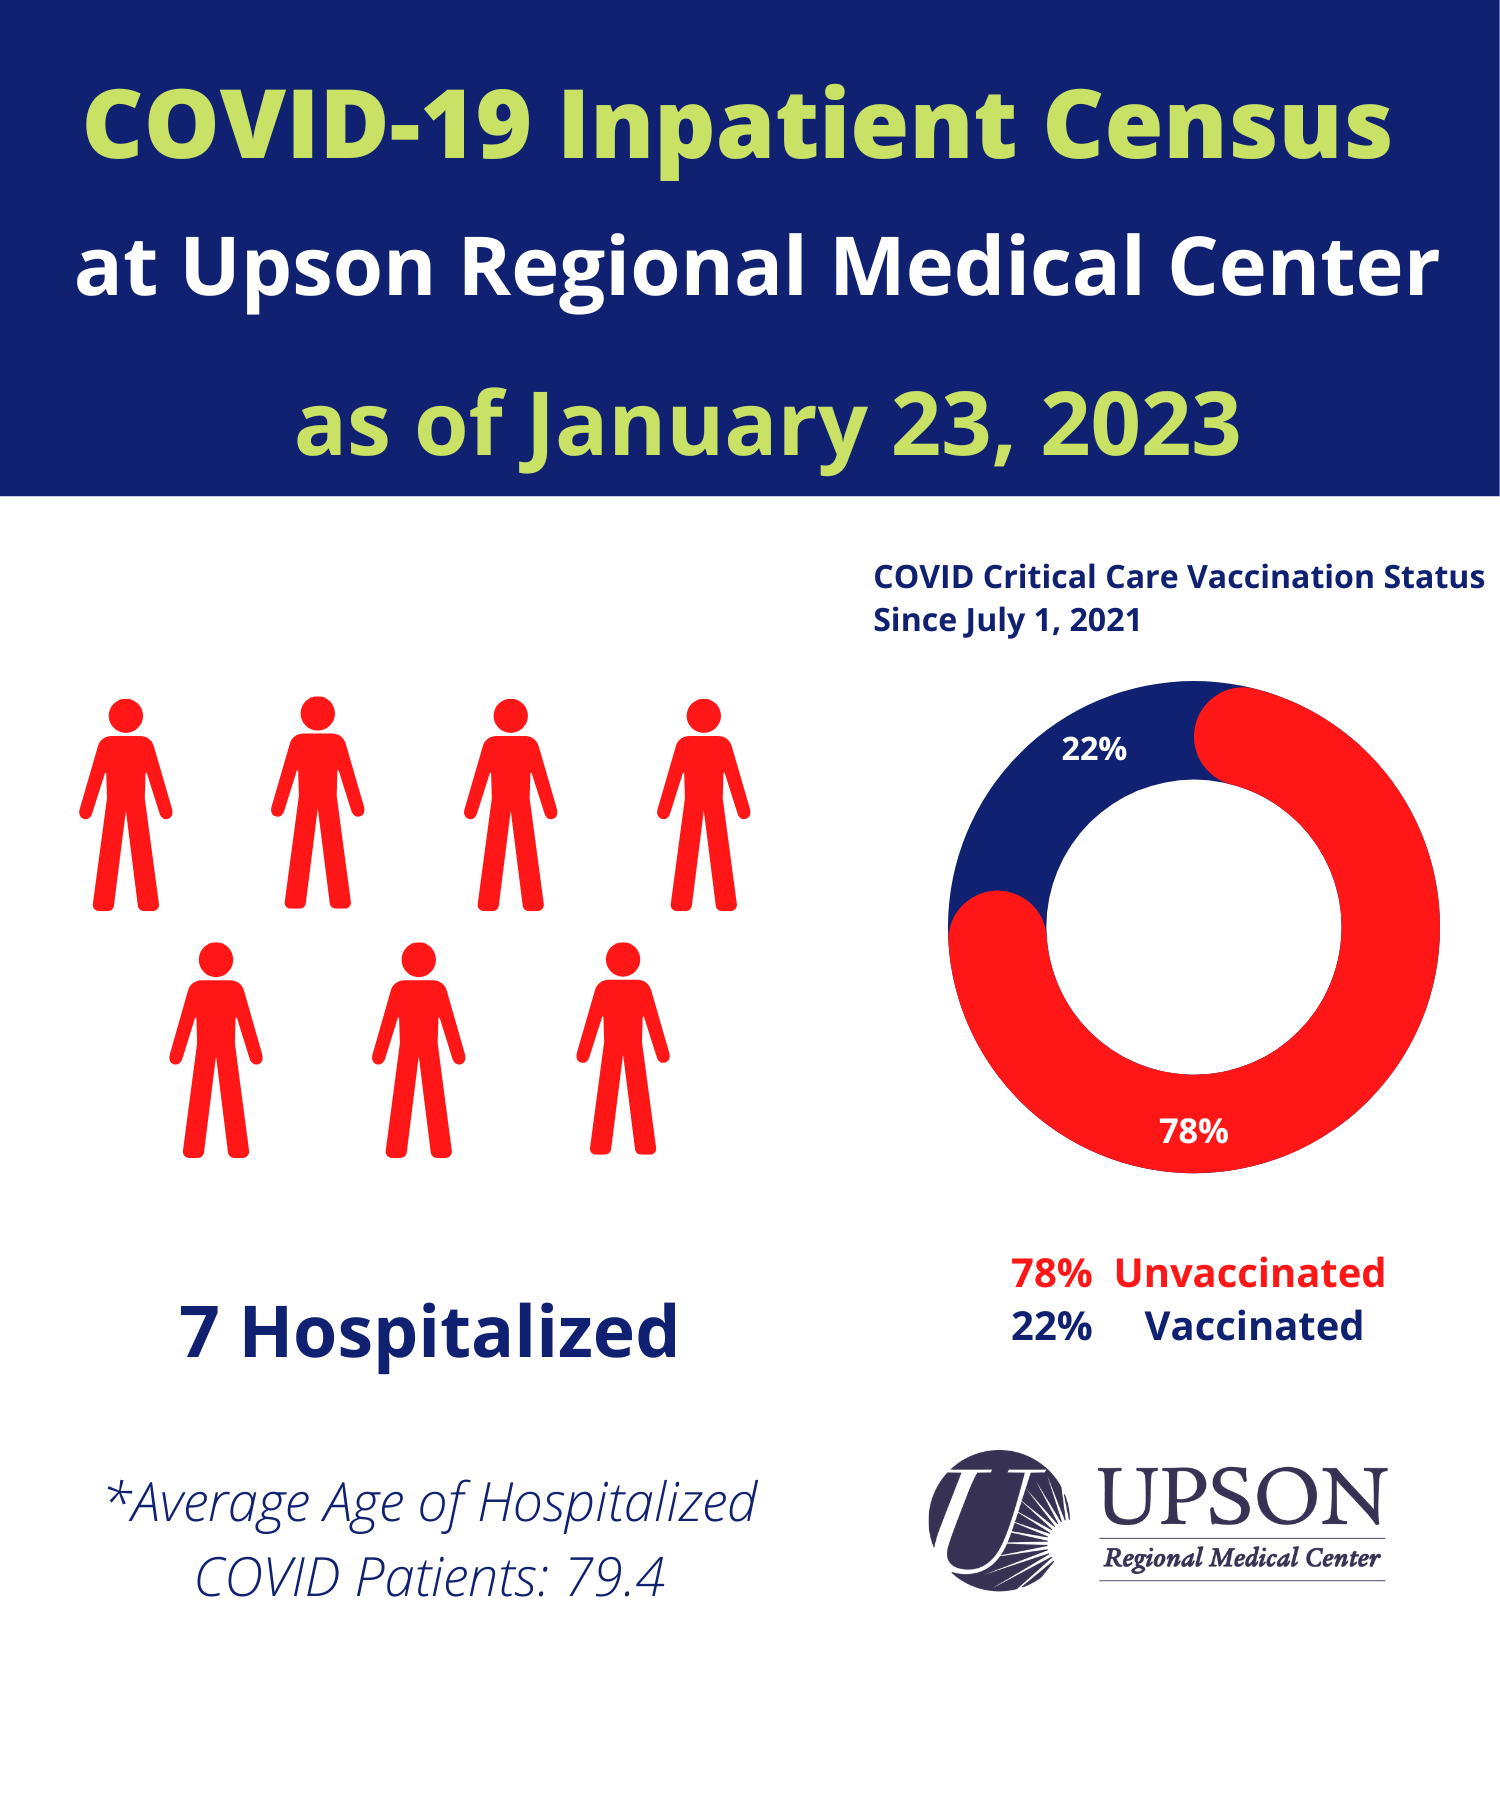 Photo for URMC COVID-19 inpatient status as of January 23, 2023.